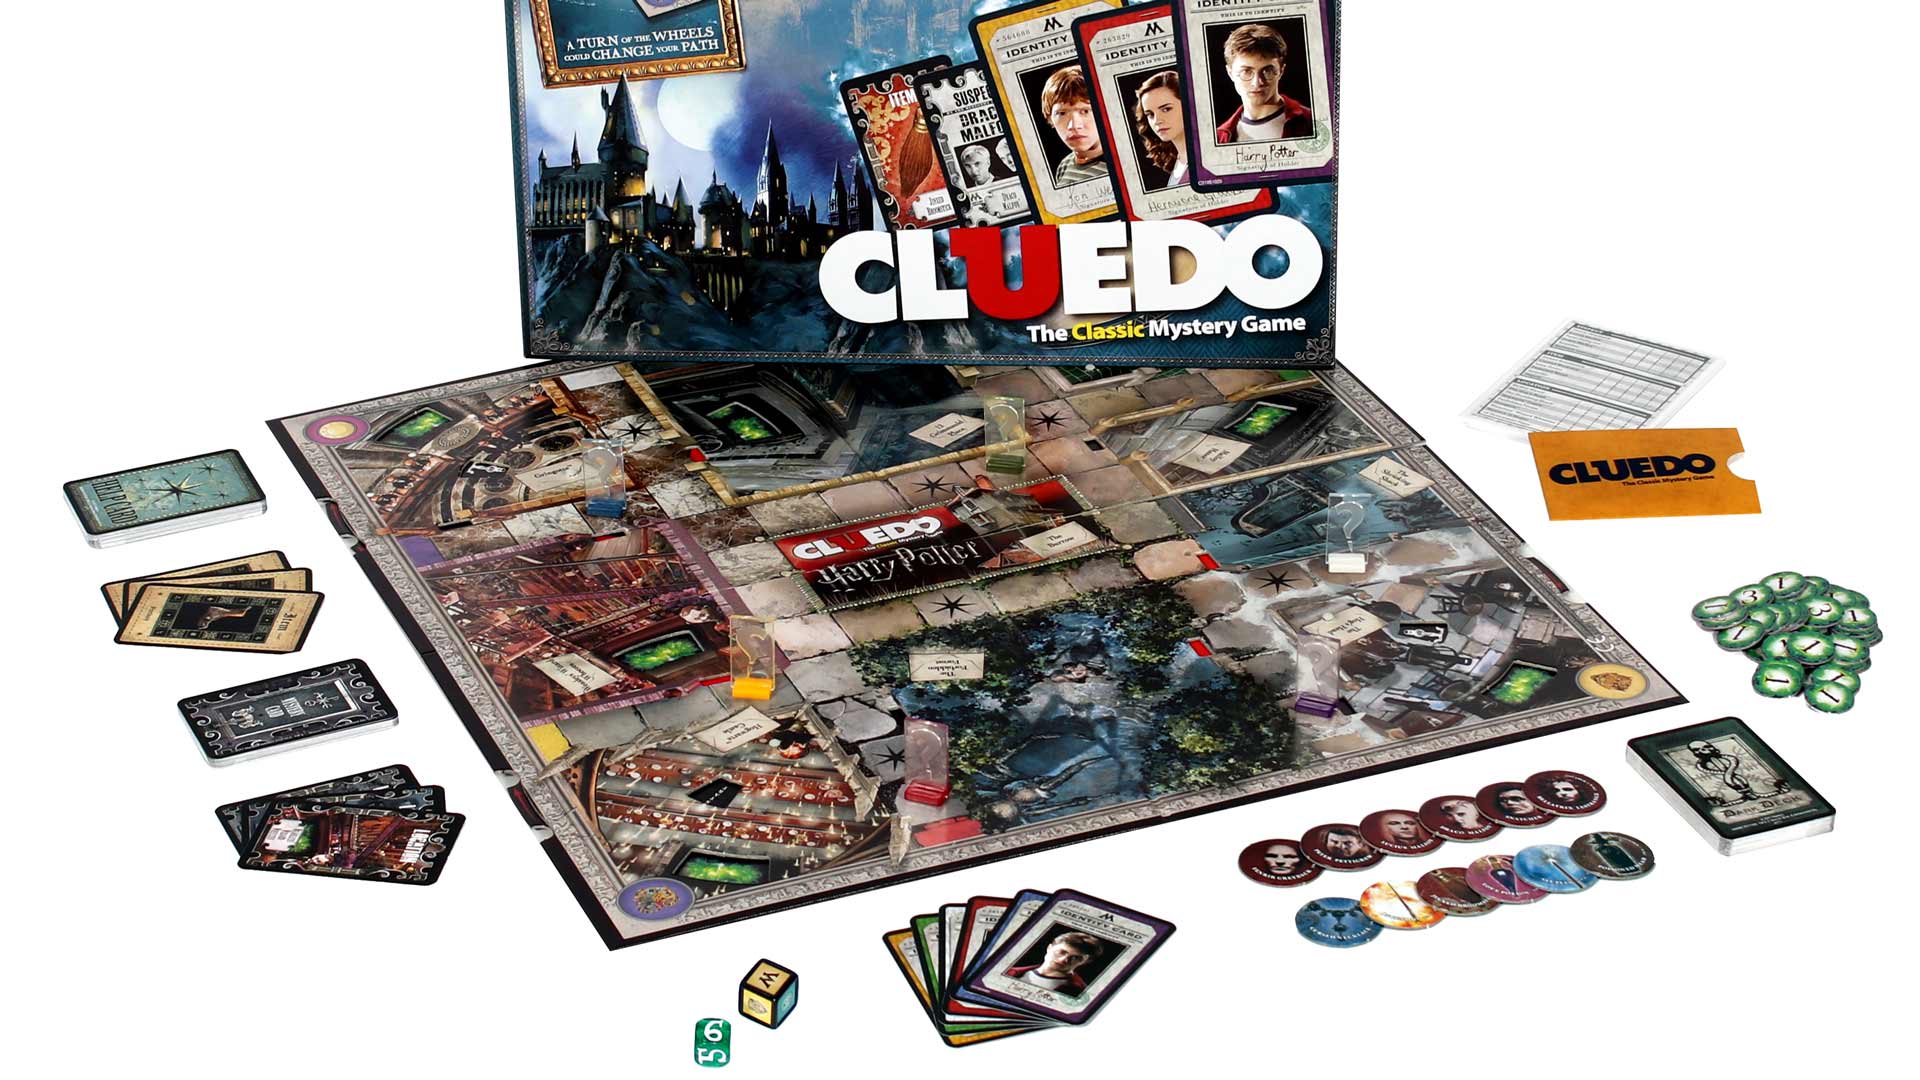 Deliveroo Is Now Delivering Pop Culture-Themed Board Games to Melbourne Homes within 30 Minutes